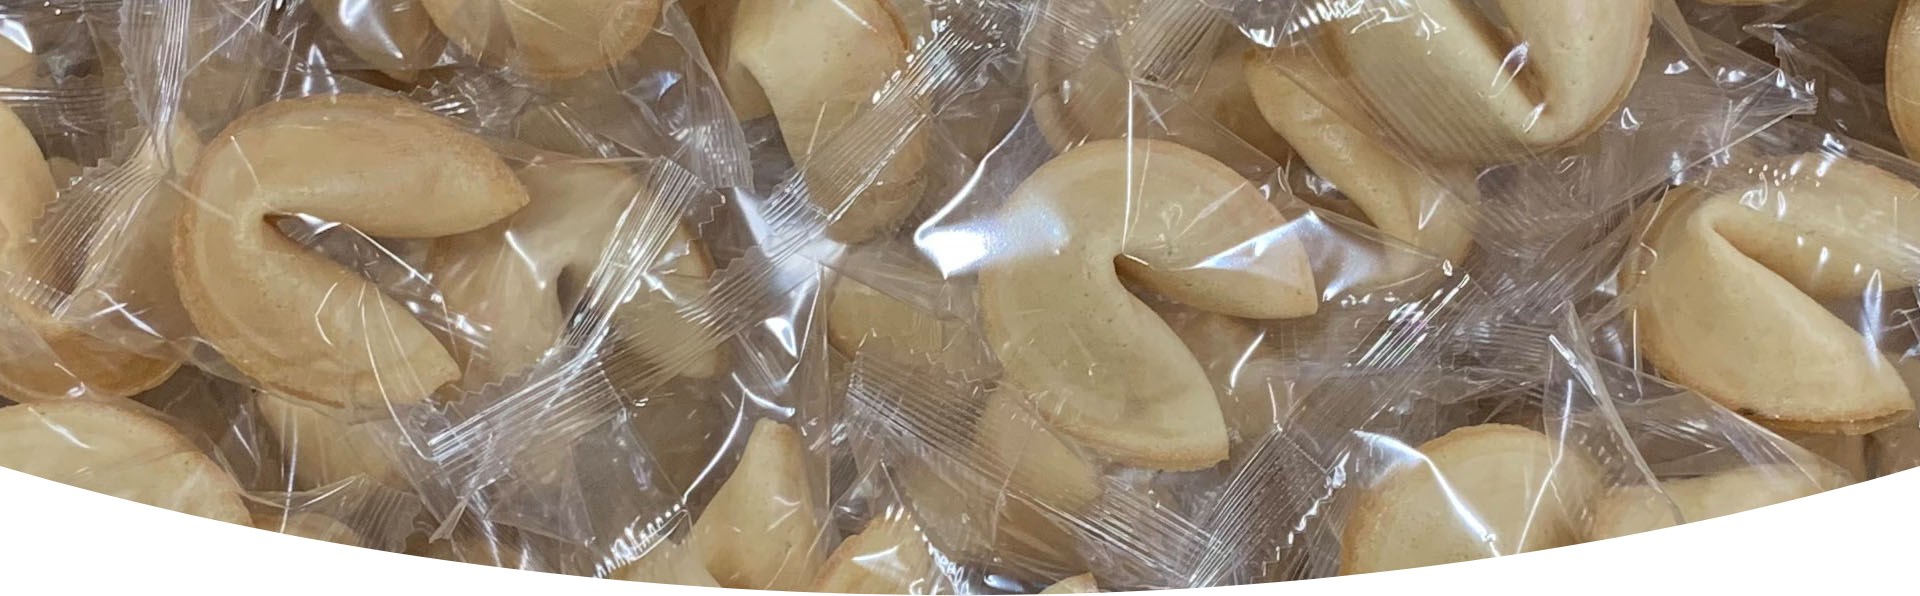 Lots of wrapped fortune cookies.Lots of wrapped fortune cookies.